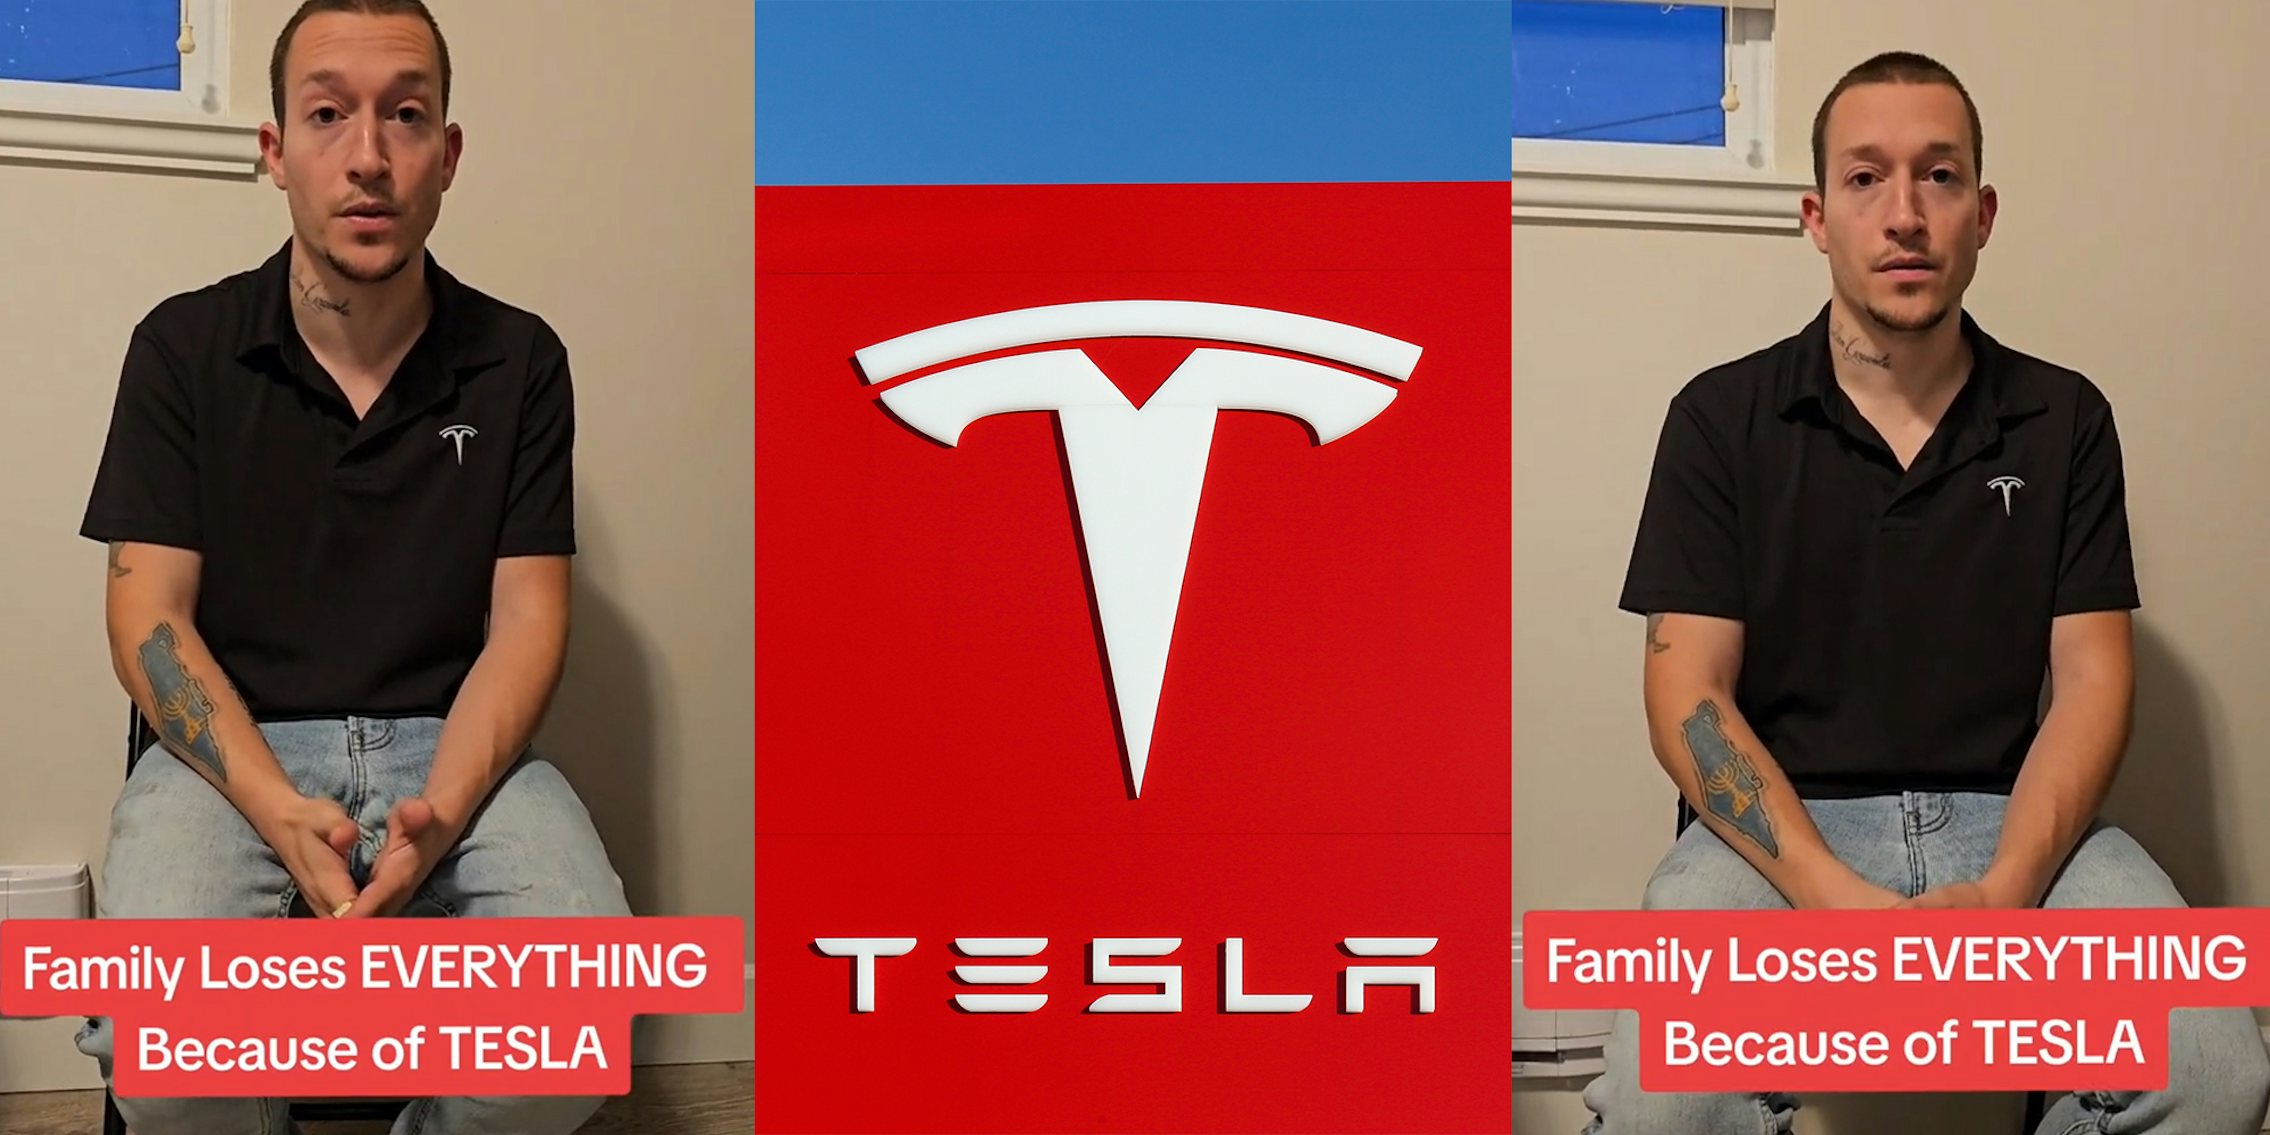 Tesla worker says company made his family 'lose everything'